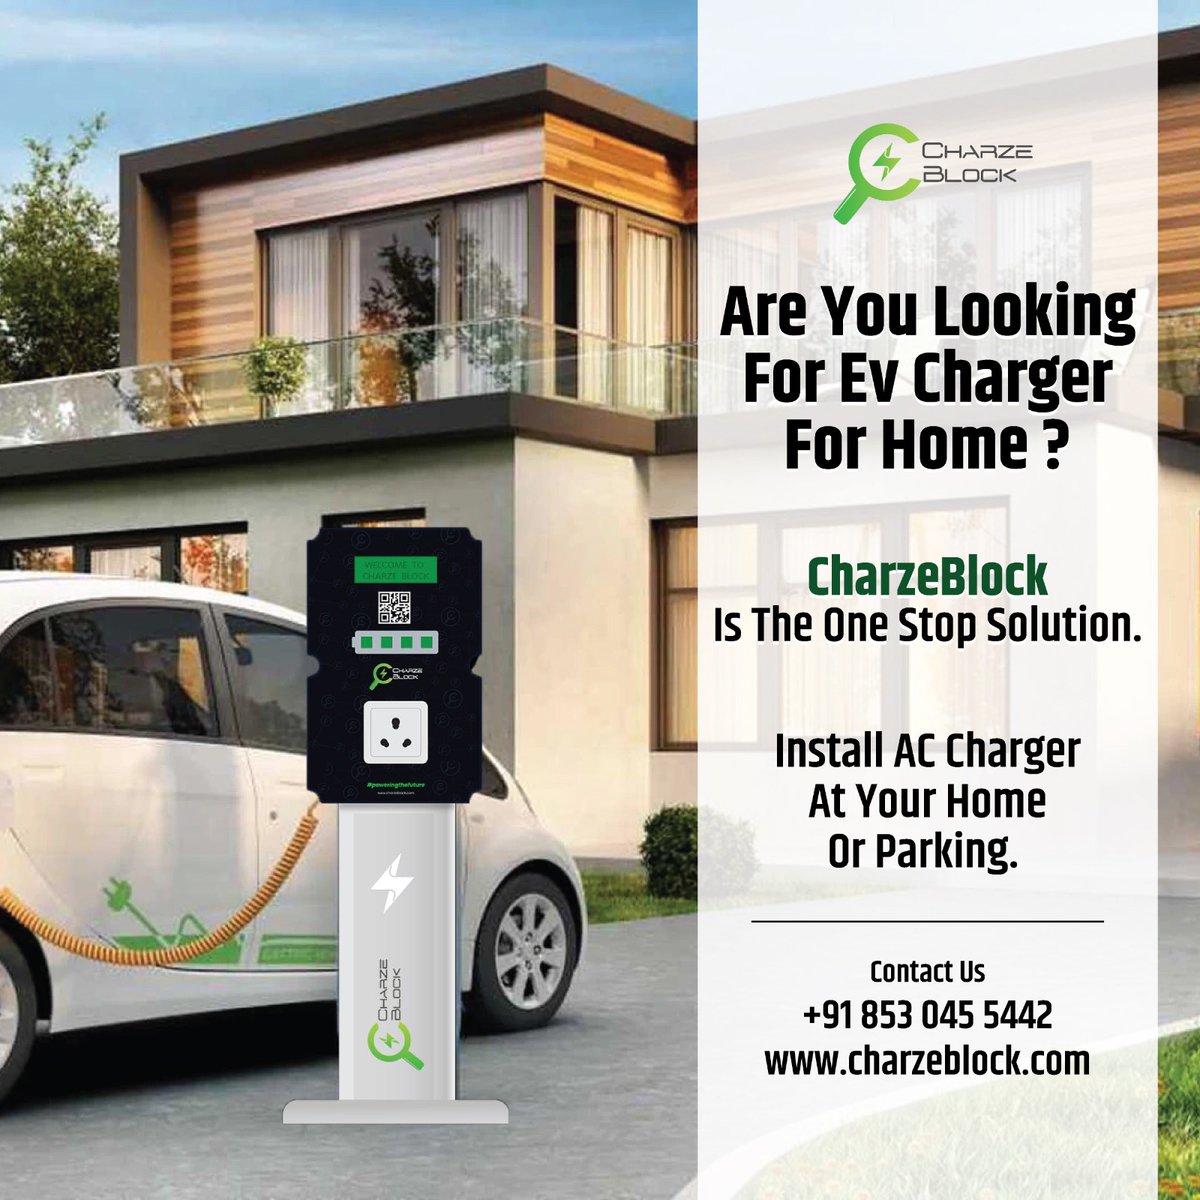 Charge up your ride effortlessly at home or parking space with Charzeblock!
#homecharger #EVcharging #electricvehiclecharging #electricvehicle #electricvehicles #Charge #ev #evchargingstation #electricvehiclechargingstation #EvchargingSolution #EVchargingstation #evstation